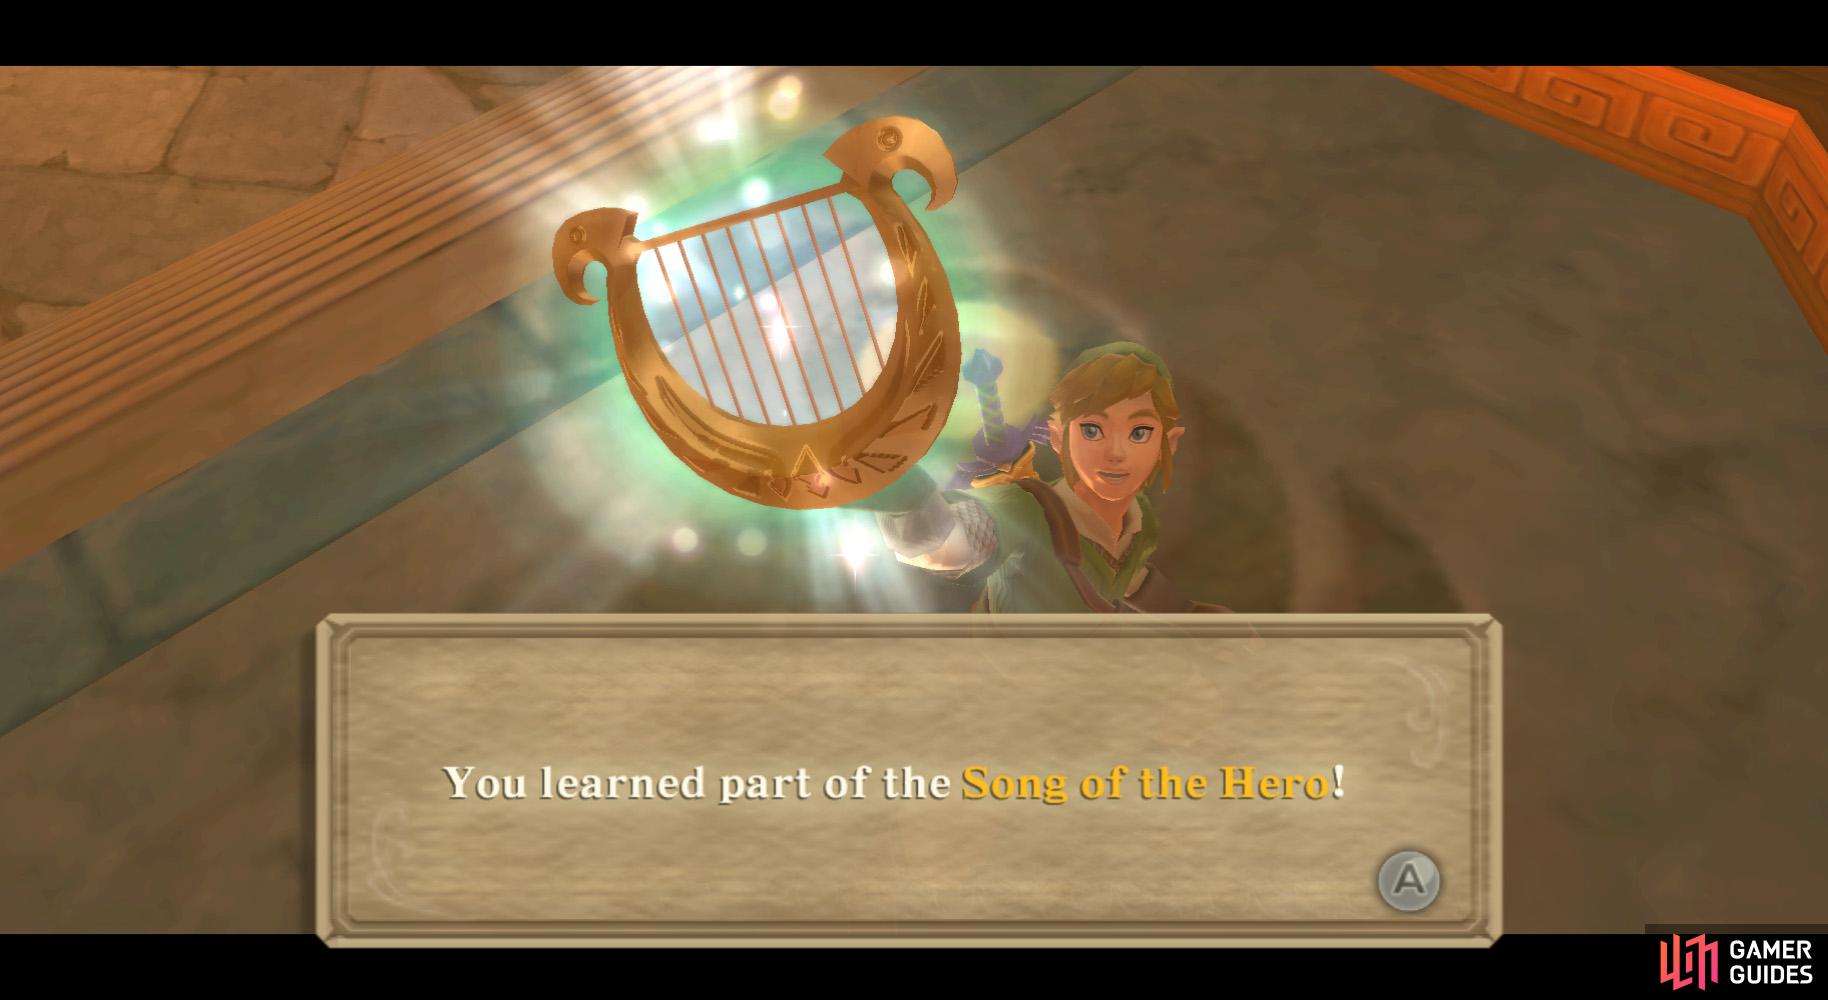 Beyond, youll learn one of the parts of the Song of the Hero.